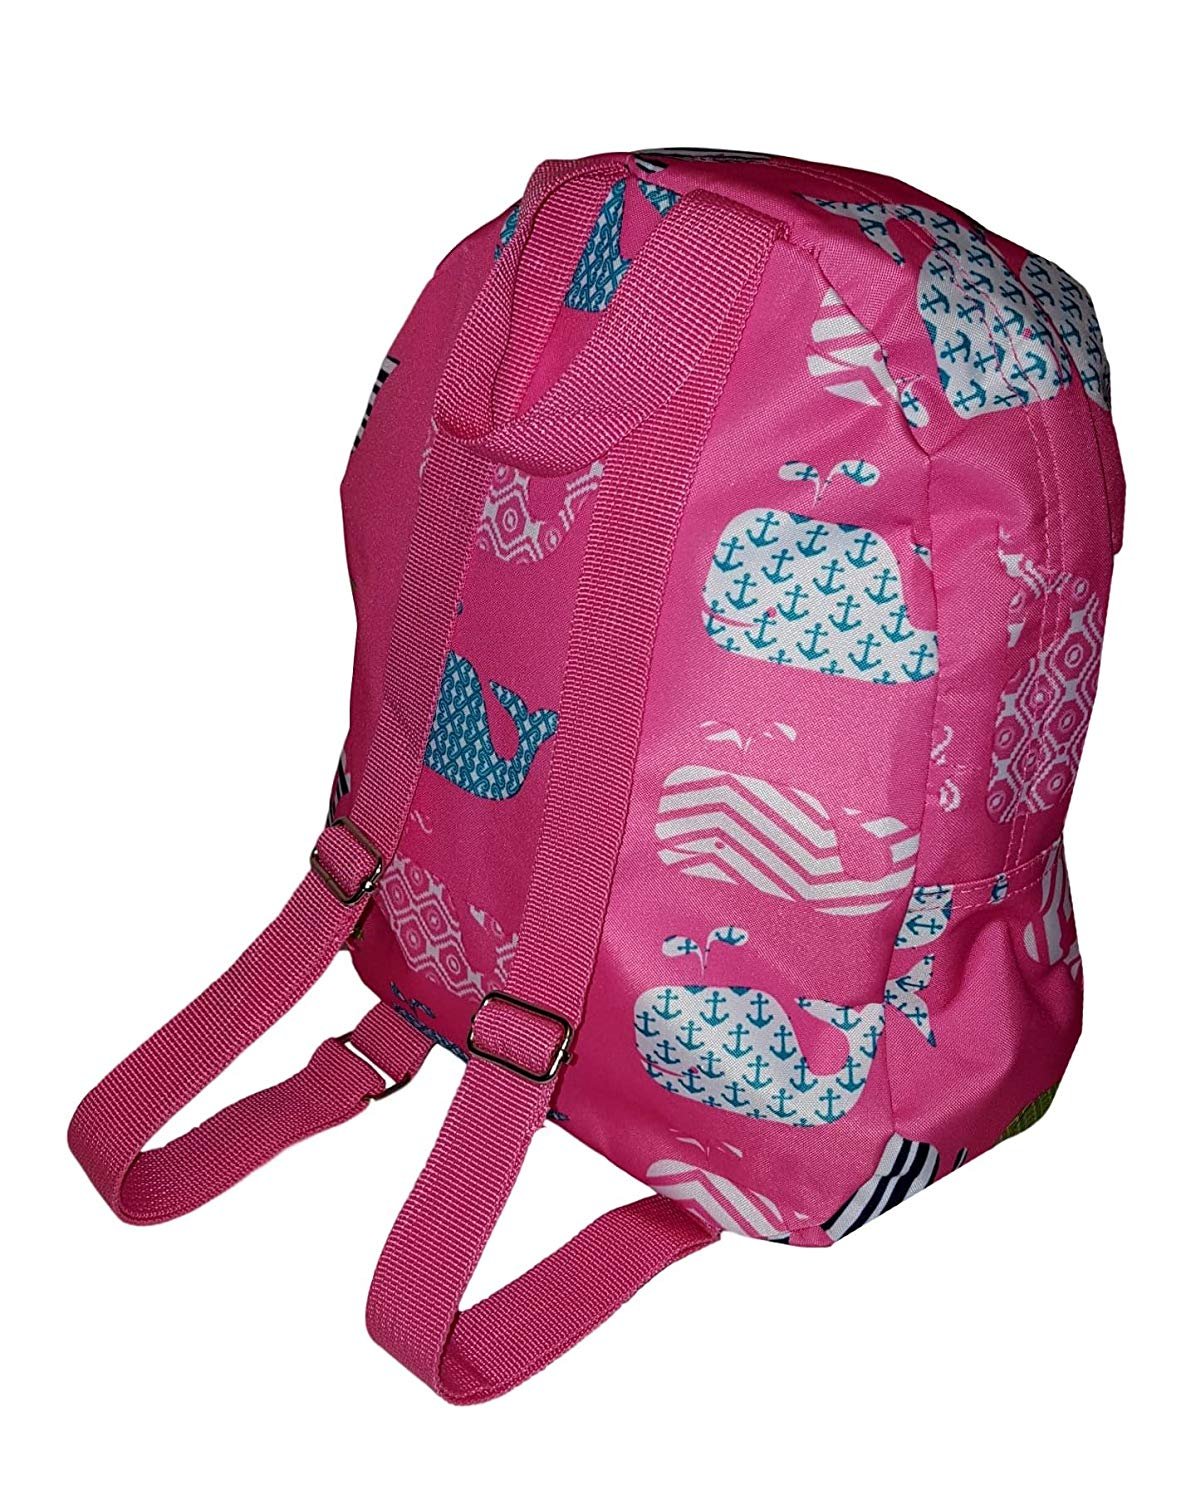 11-inch Mini Backpack Purse, Zipper Front Pockets Teen Child Pink Whale print - image 3 of 3